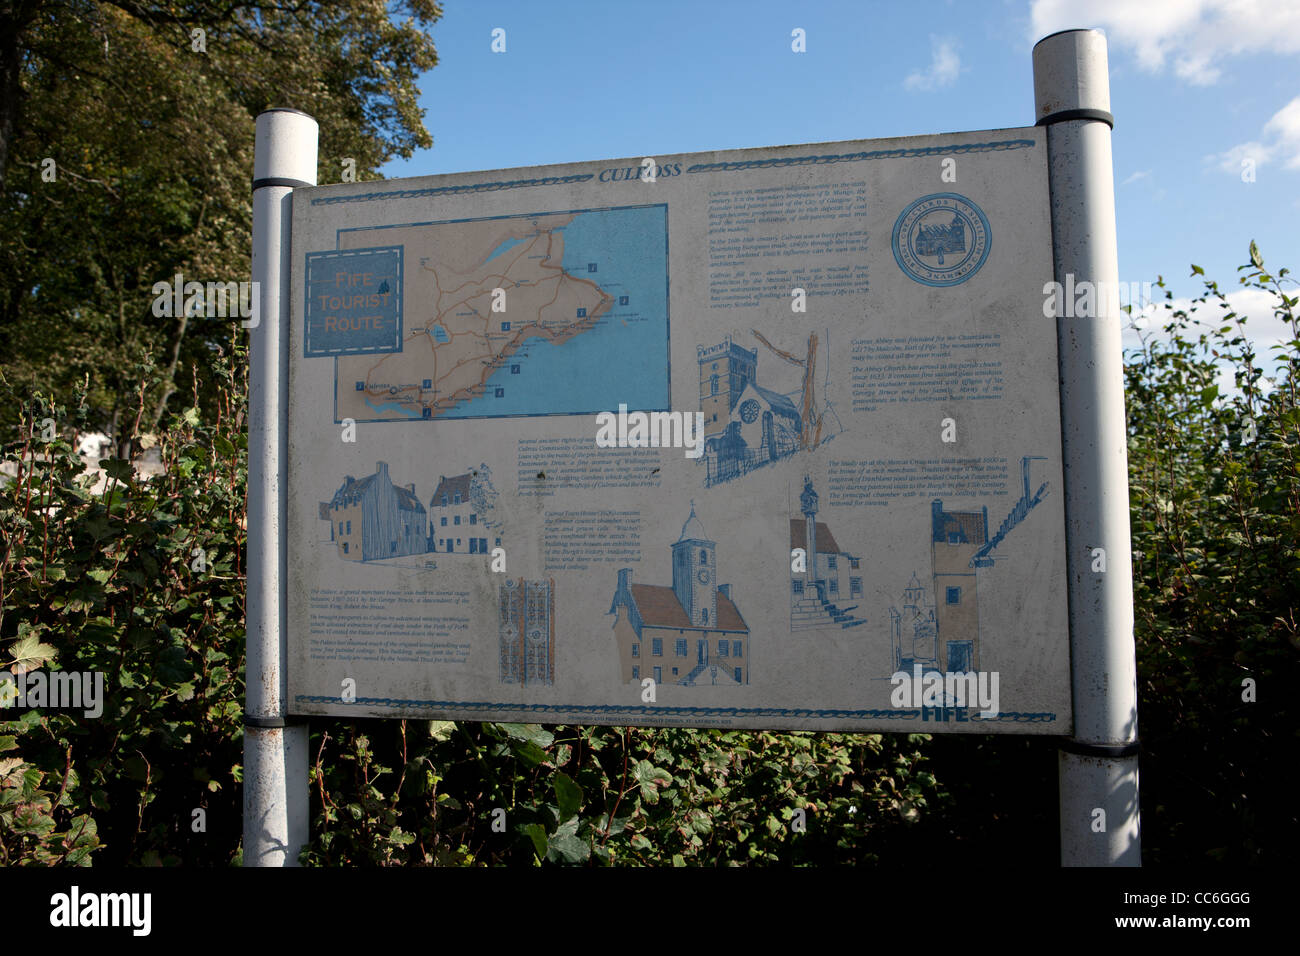 Fife Tourist route information board for the village of Culross Stock Photo